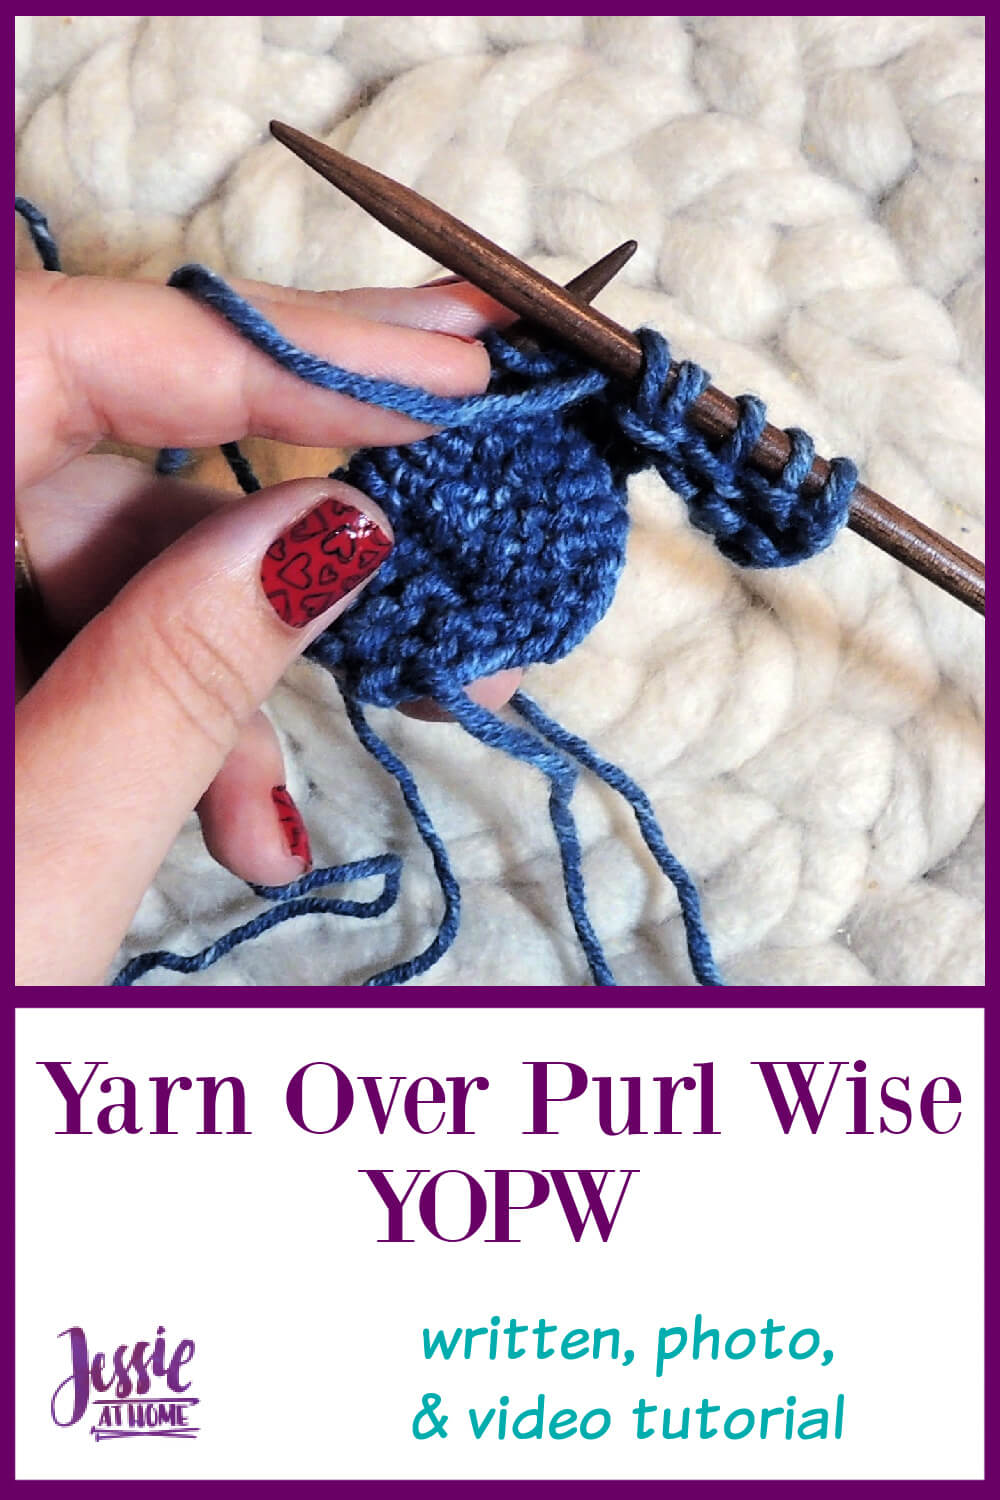 Yarn Over Purl Wise